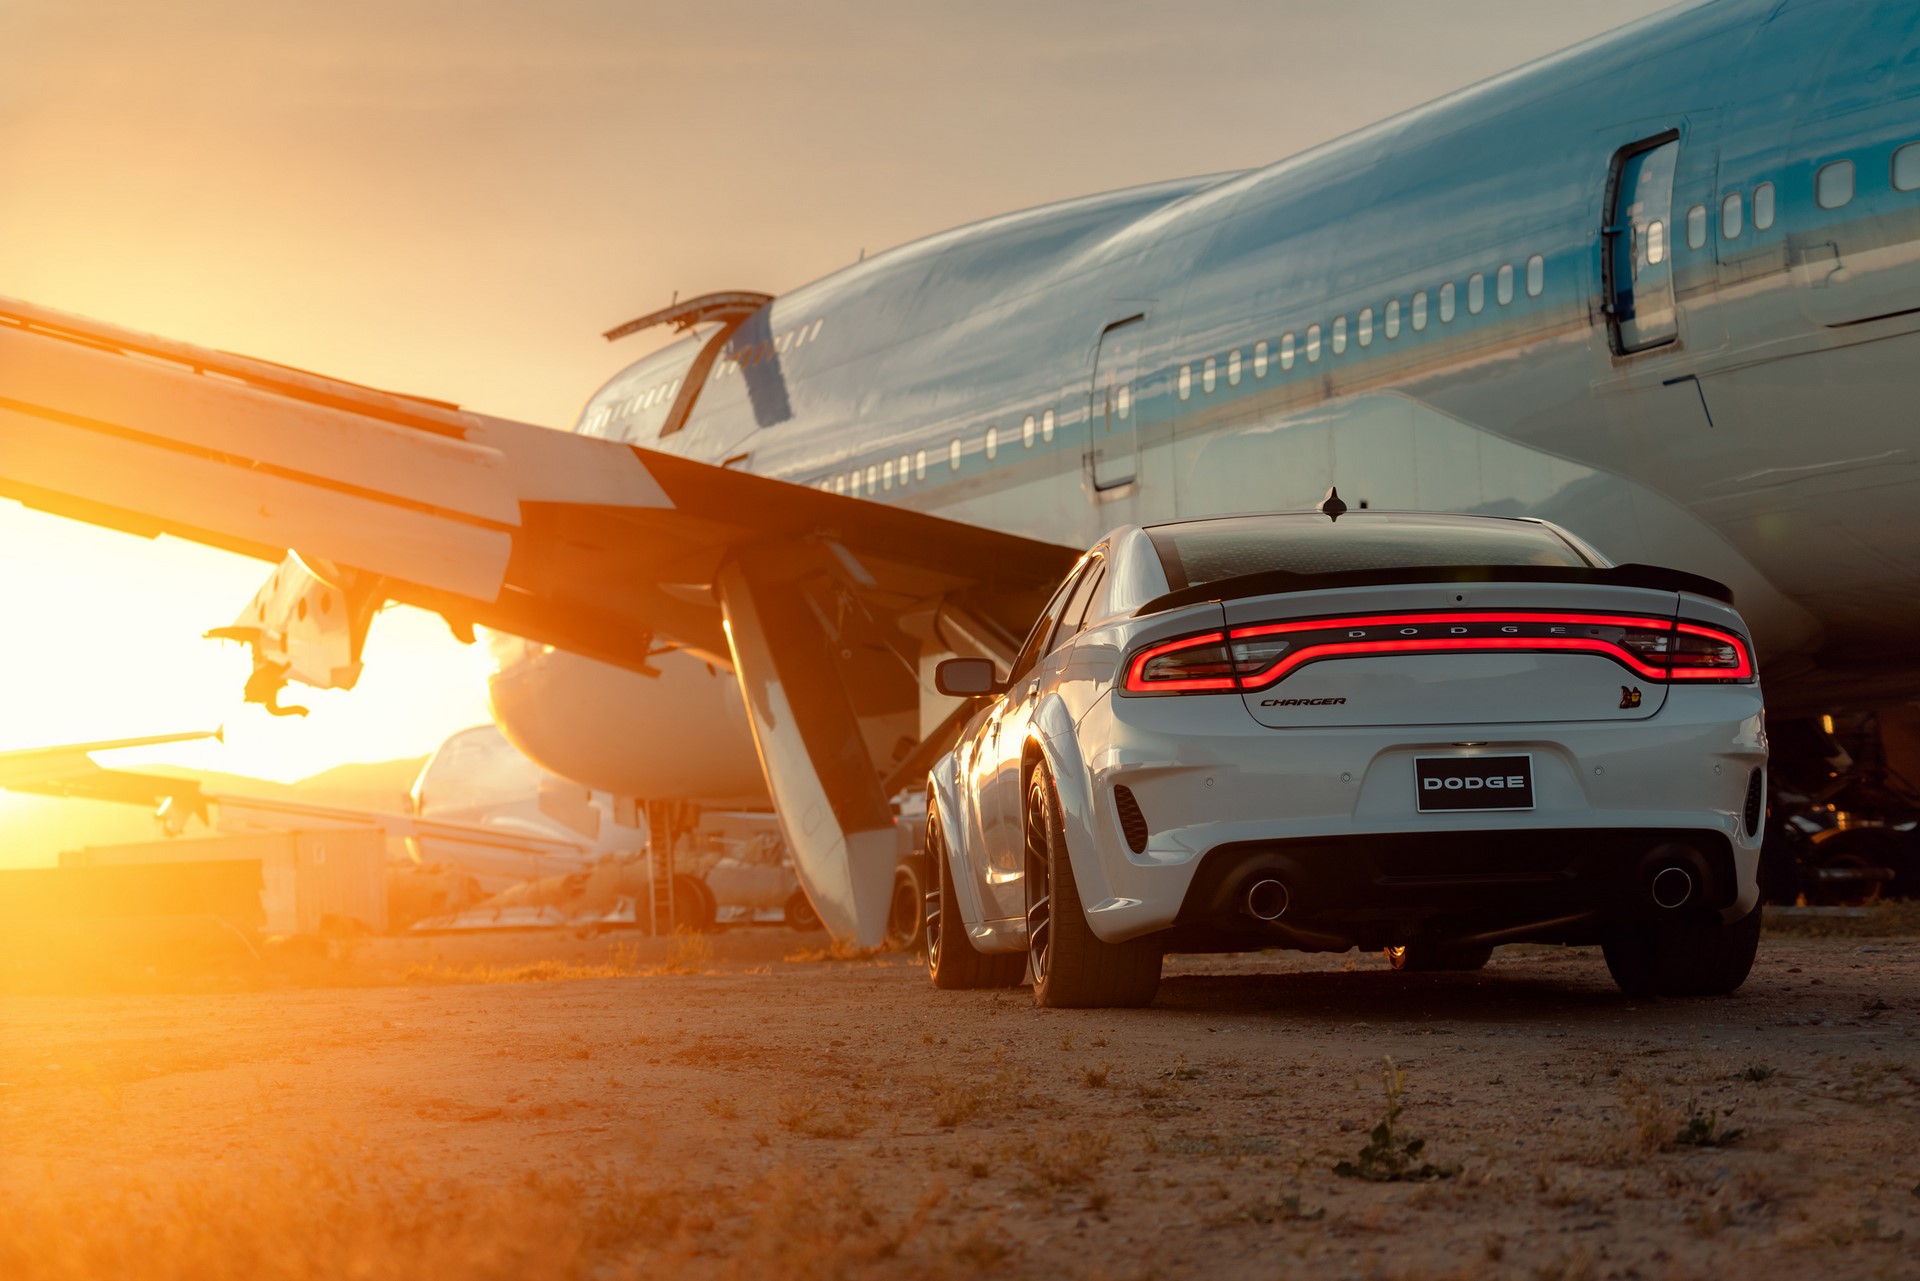 The 2020 Dodge Charger Scat Pack Widebody features a best-in-class, naturally aspirated 485-horsepower from the proven 392 cubic inch HEMI® V-8 engine